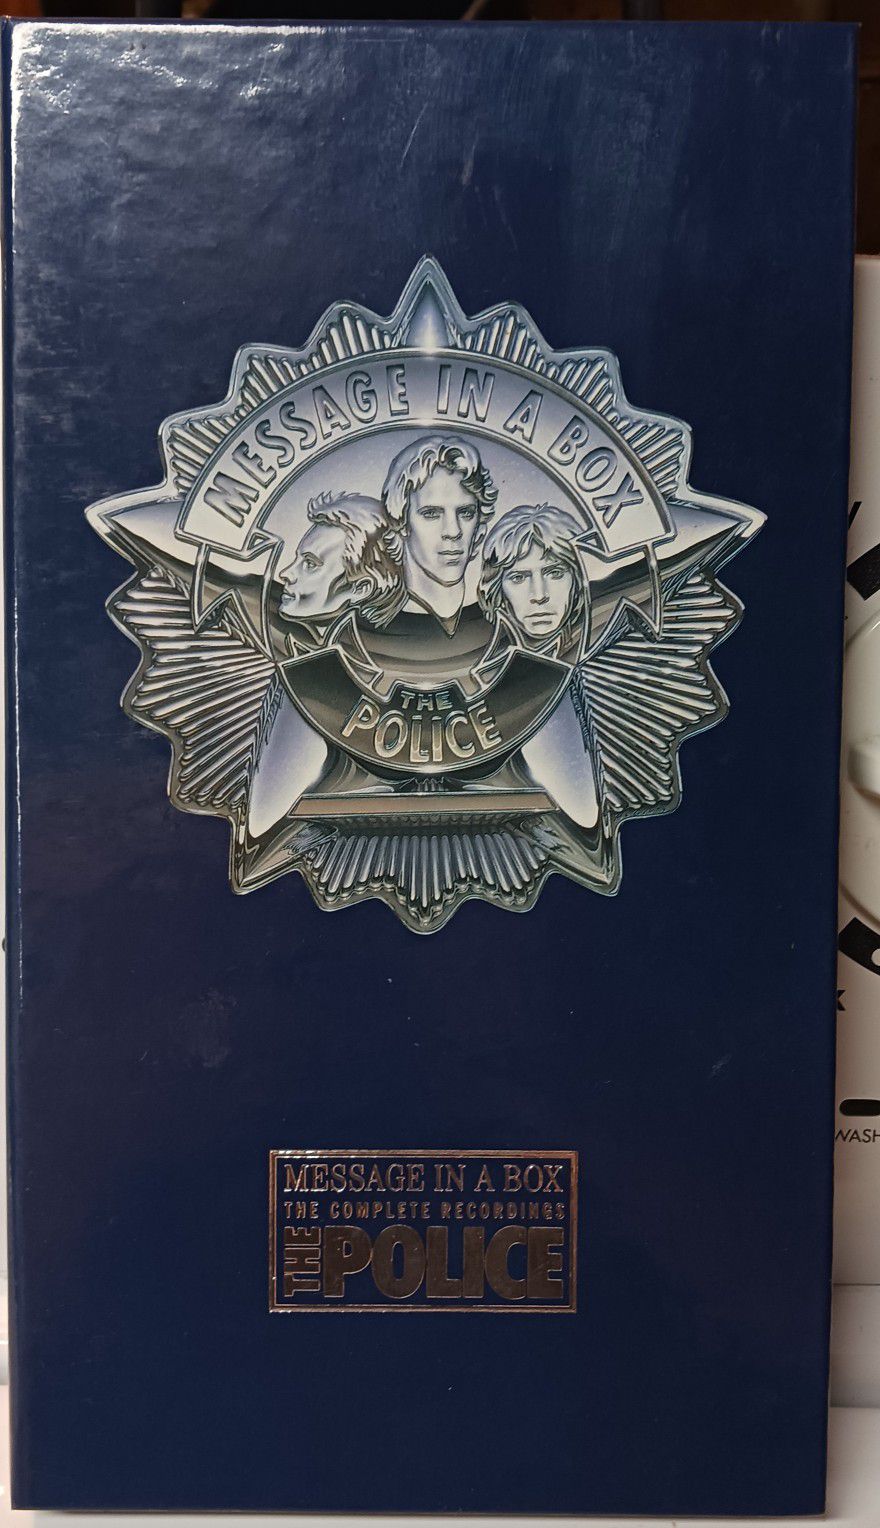 The Police CD Box Set Message In A Box